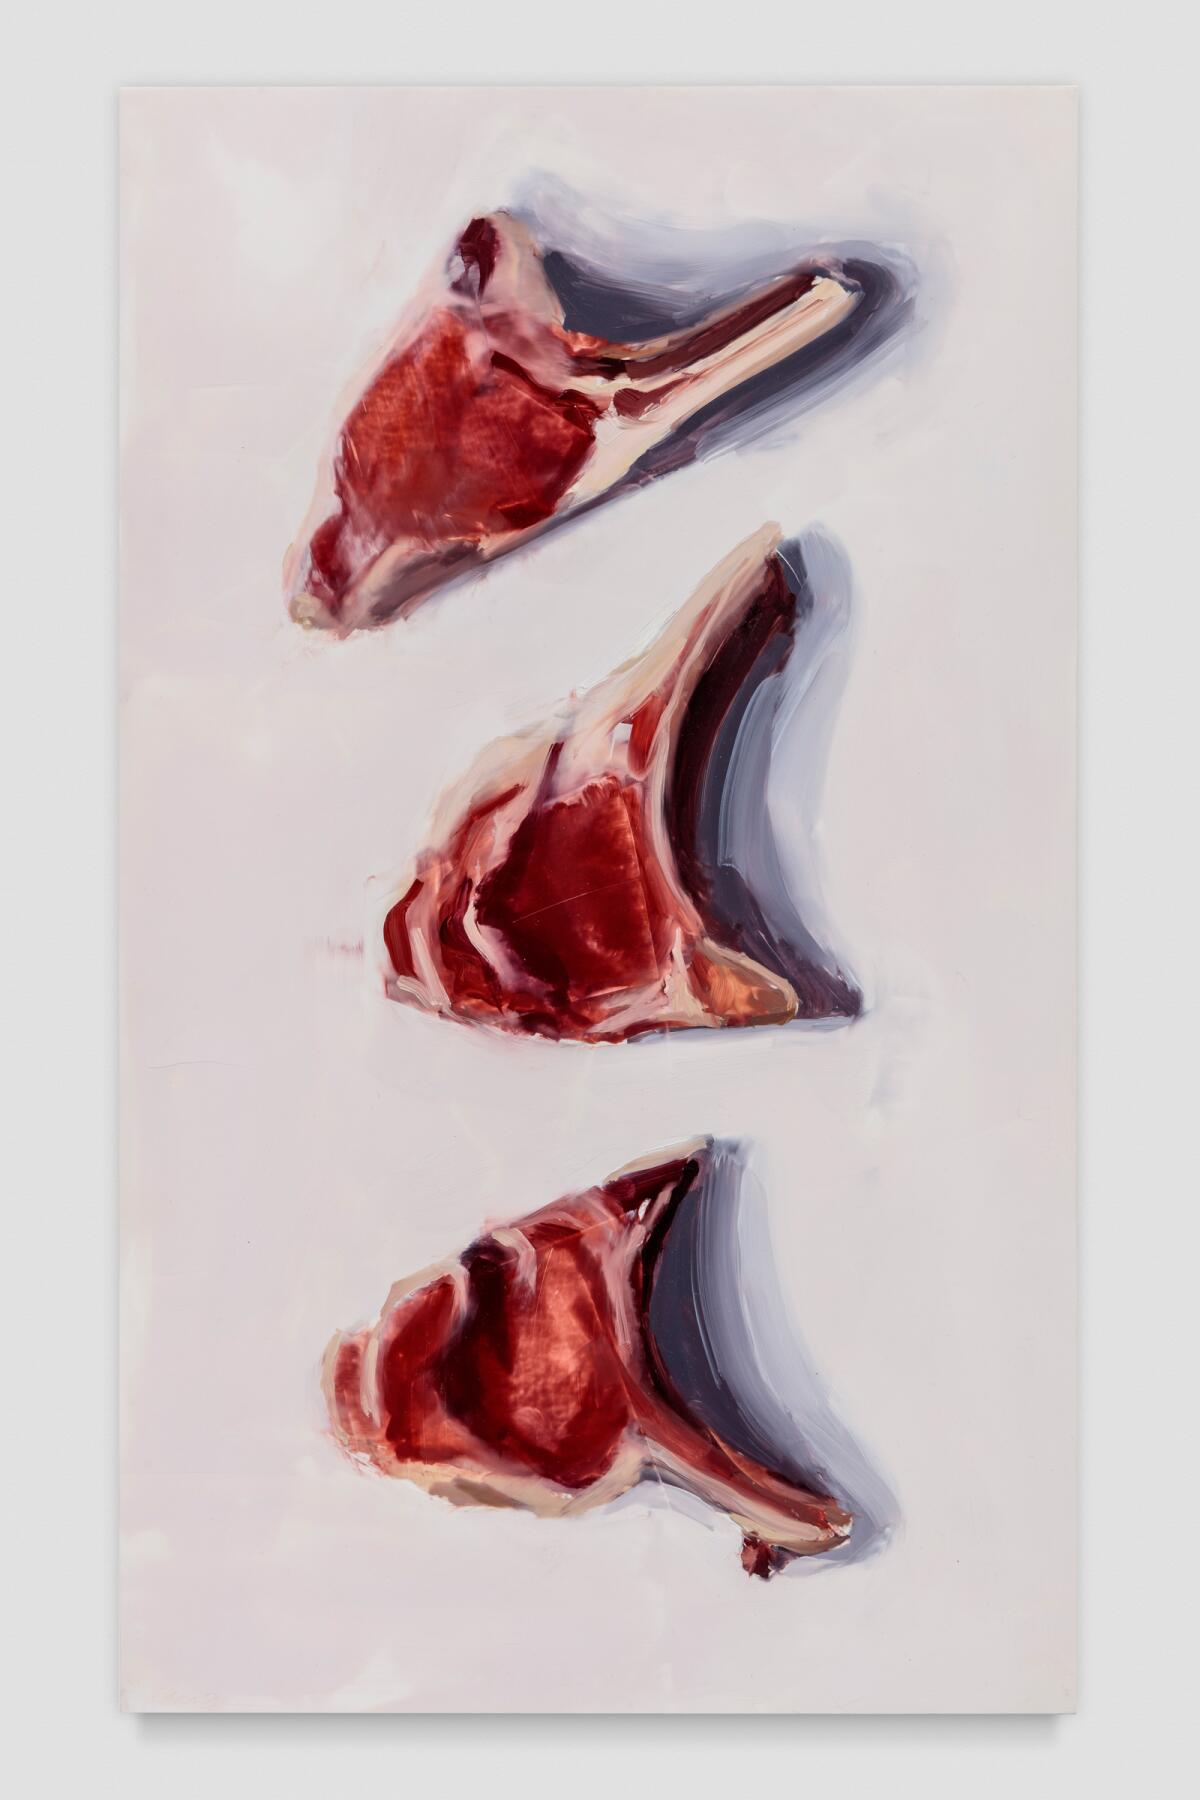 An artwork featuring three painted lamb chops arranged vertically on a white background